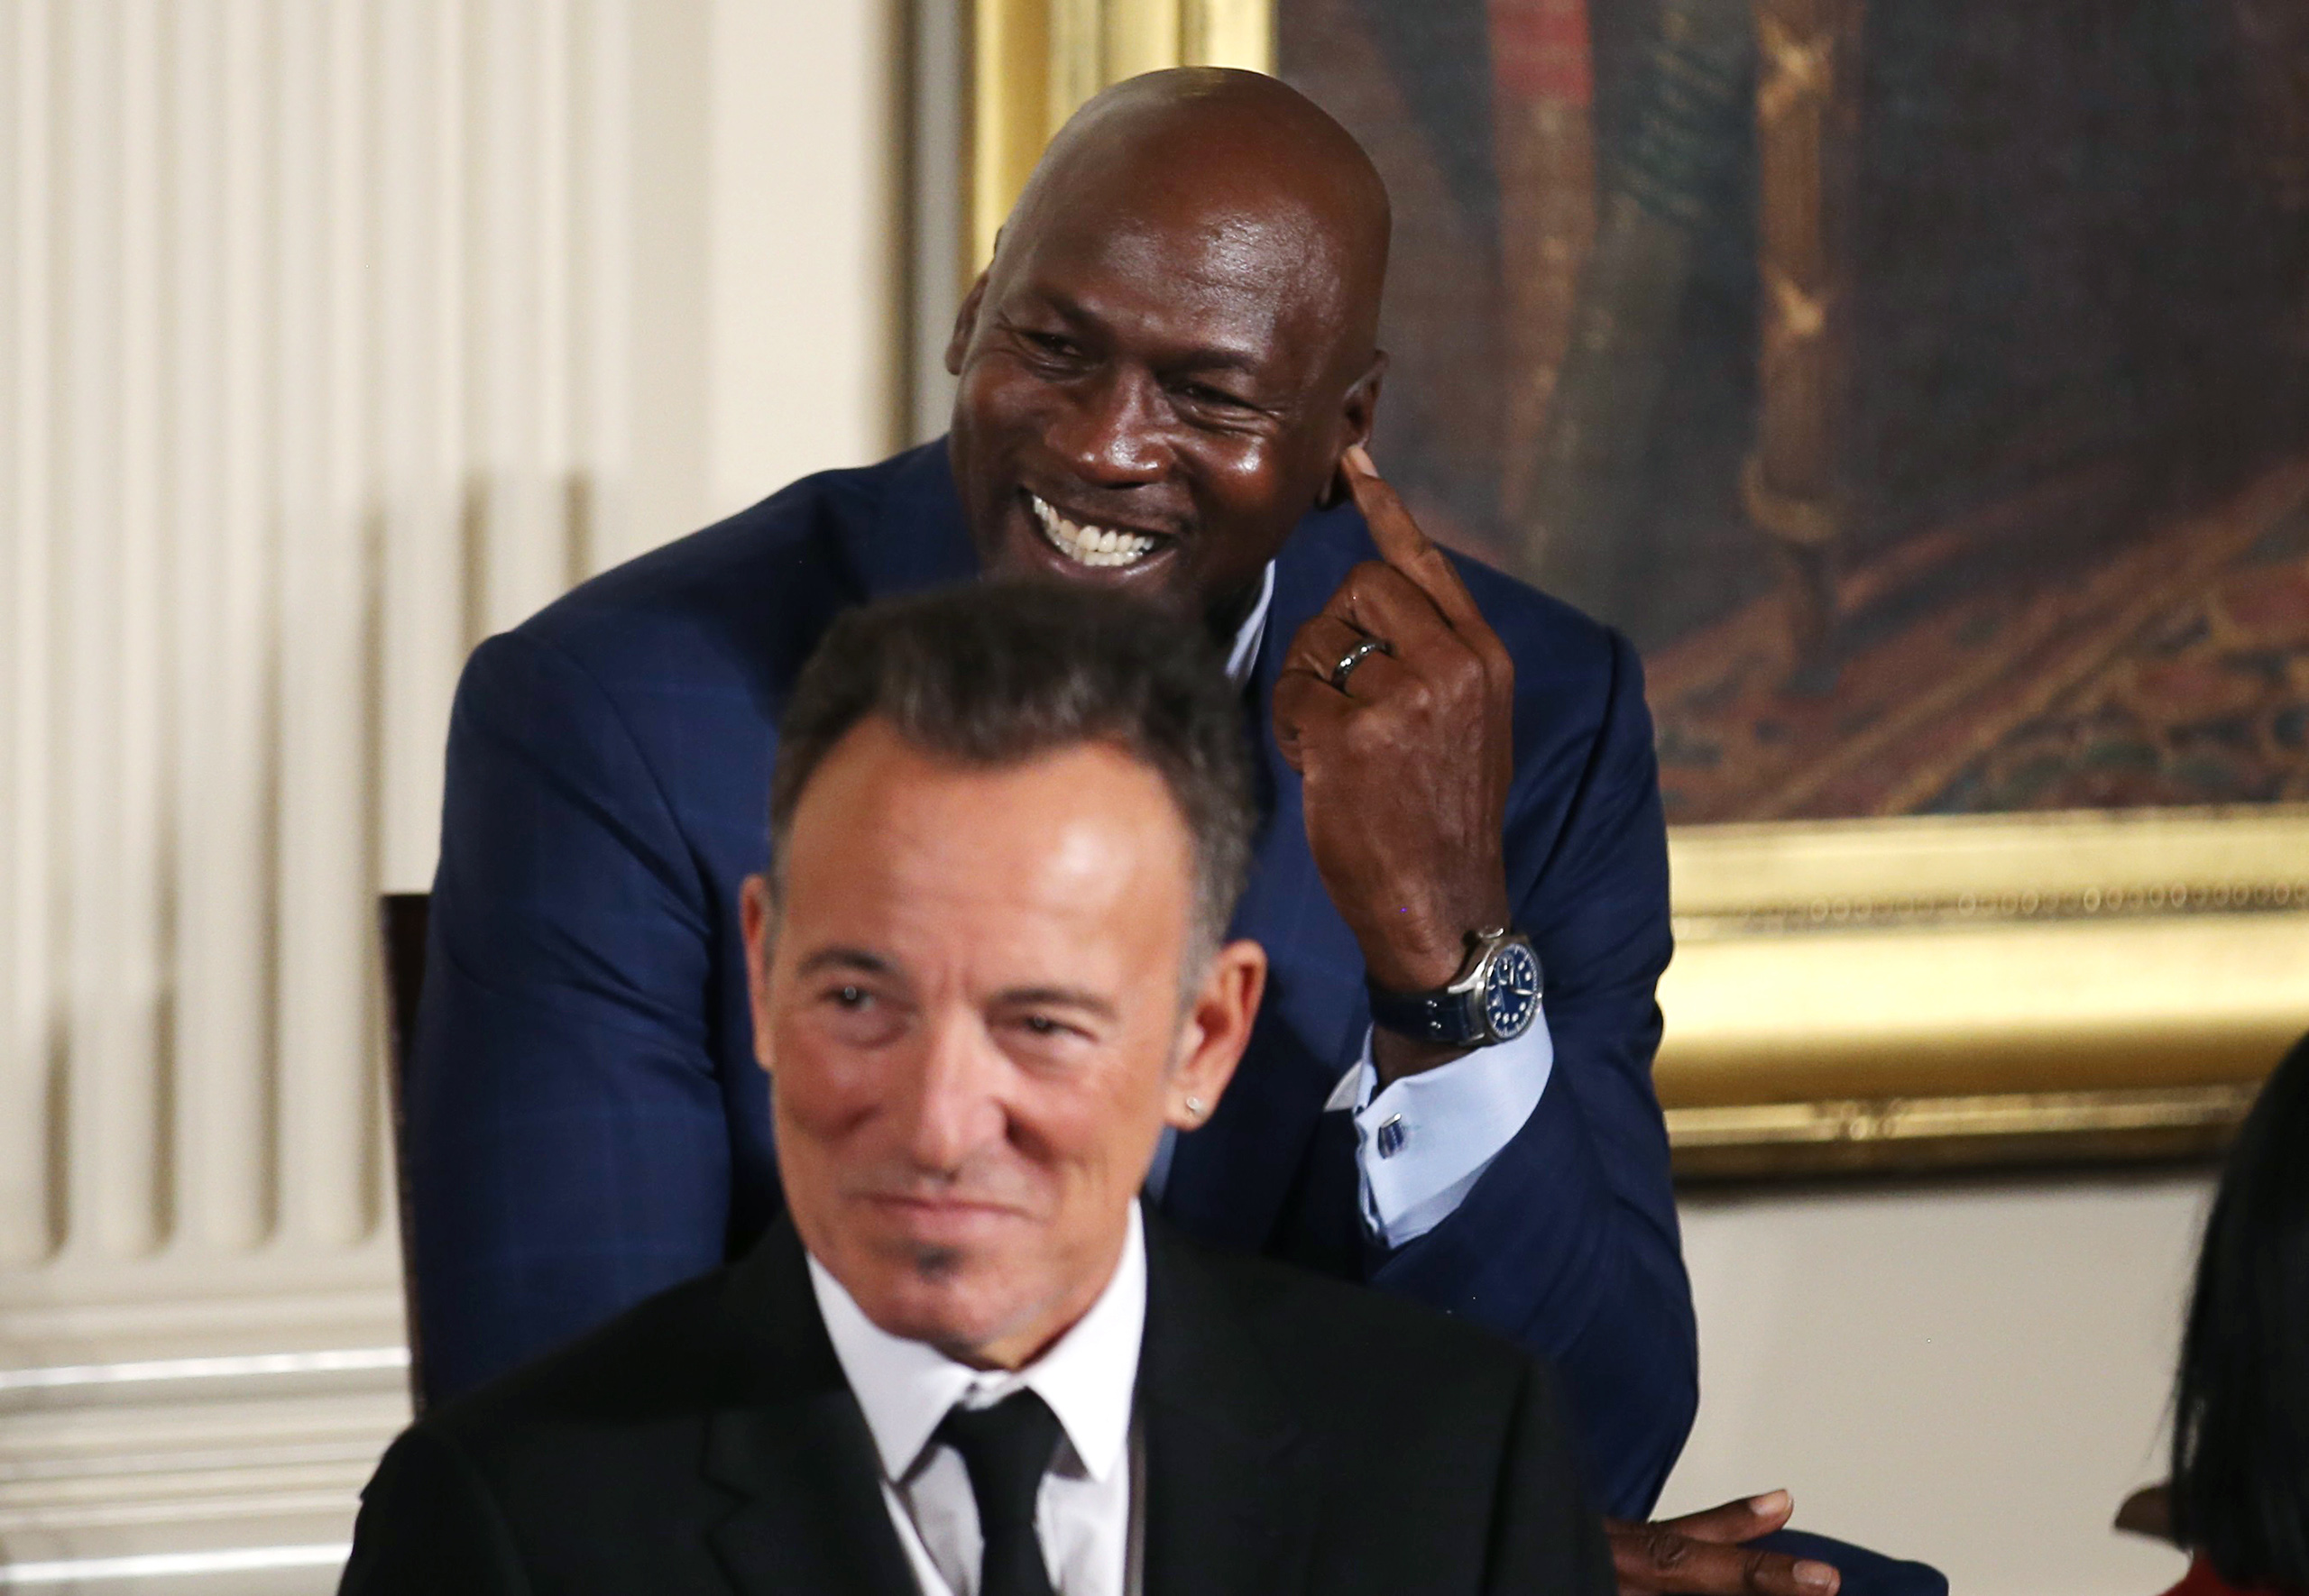 NBA star Michael Jordan and musician Bruce Springsteen attend the Presidential Medal of Freedom awards in the East Room of the White House in Washington, on Nov. 22, 2016. (Carlos Barria—Reuters)